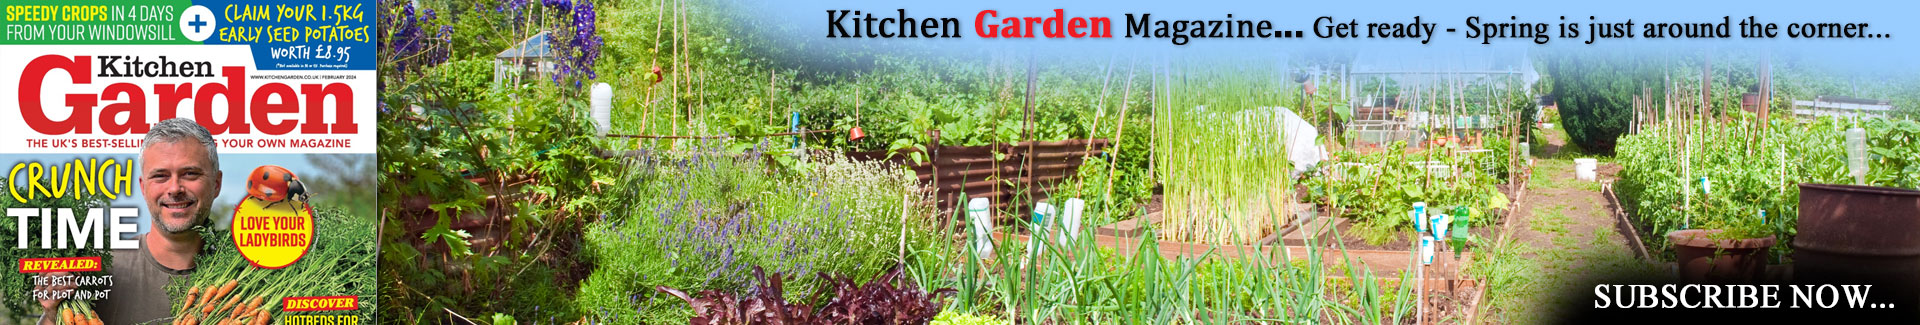 Kitchen Garden Magazine - Subscribe and get ready as spring is just around the corner.